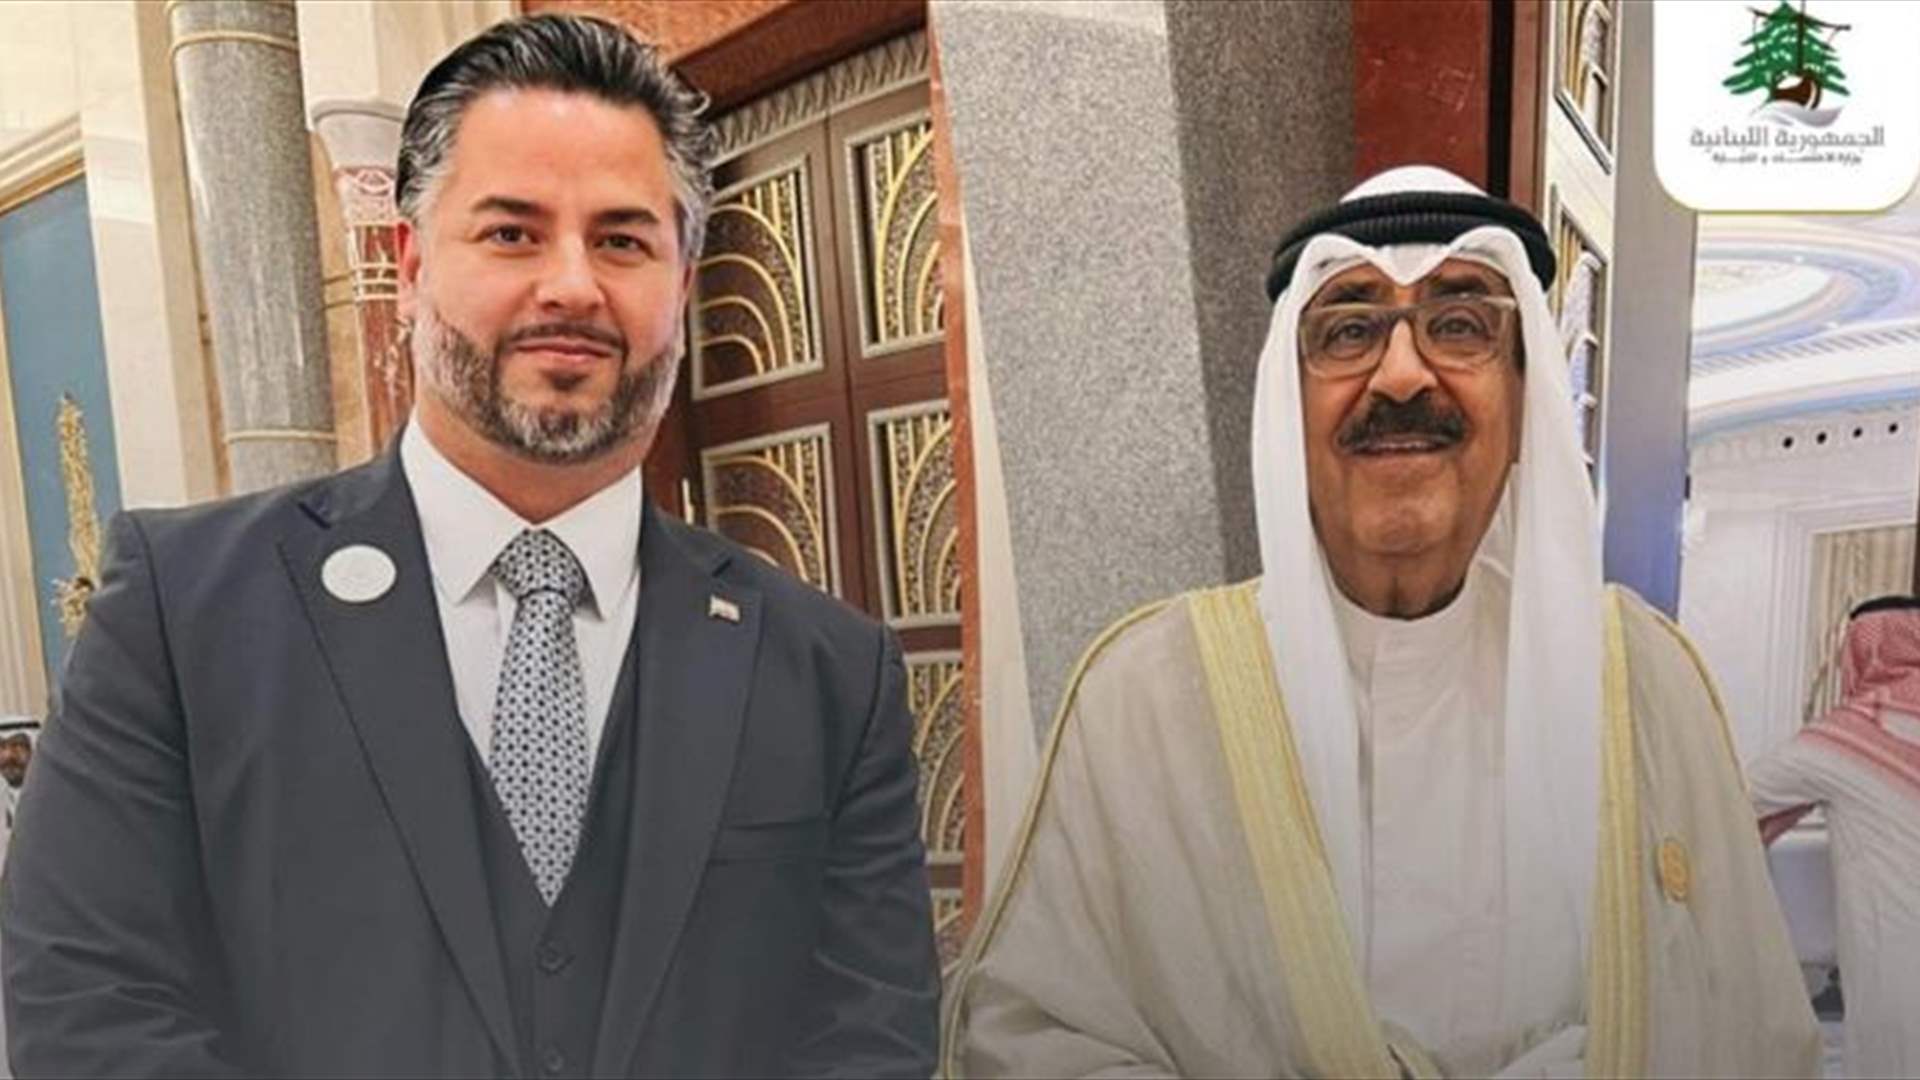 Compassionate meeting: Economy Minister and Kuwaiti Crown Prince discuss strong bilateral bonds